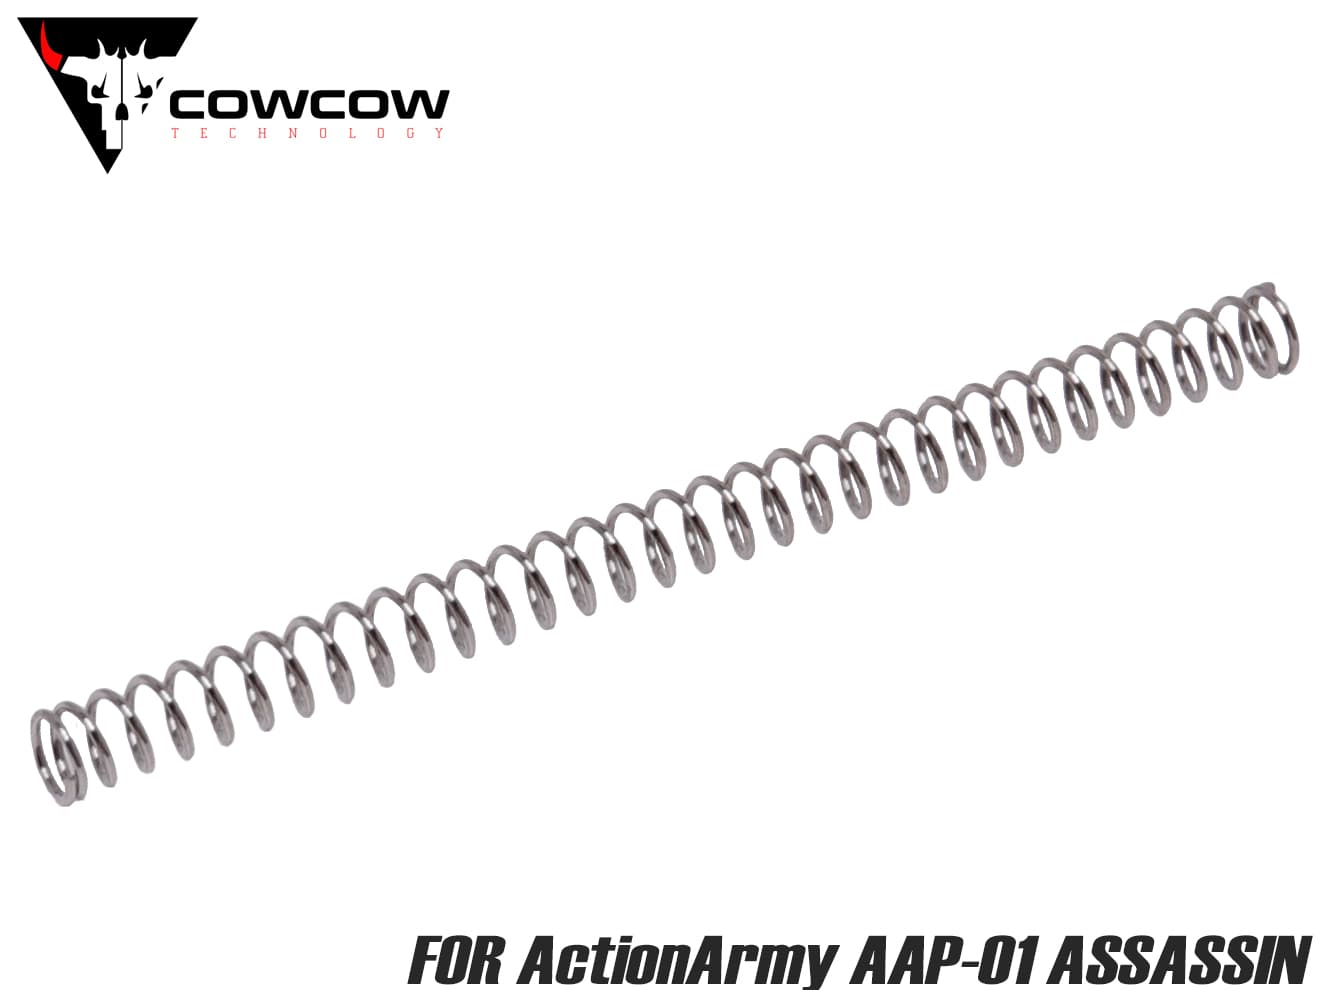 COWCOW TECHNOLOGY 200% 強化ノズルリターンスプリング for ActionArmy AAP-01